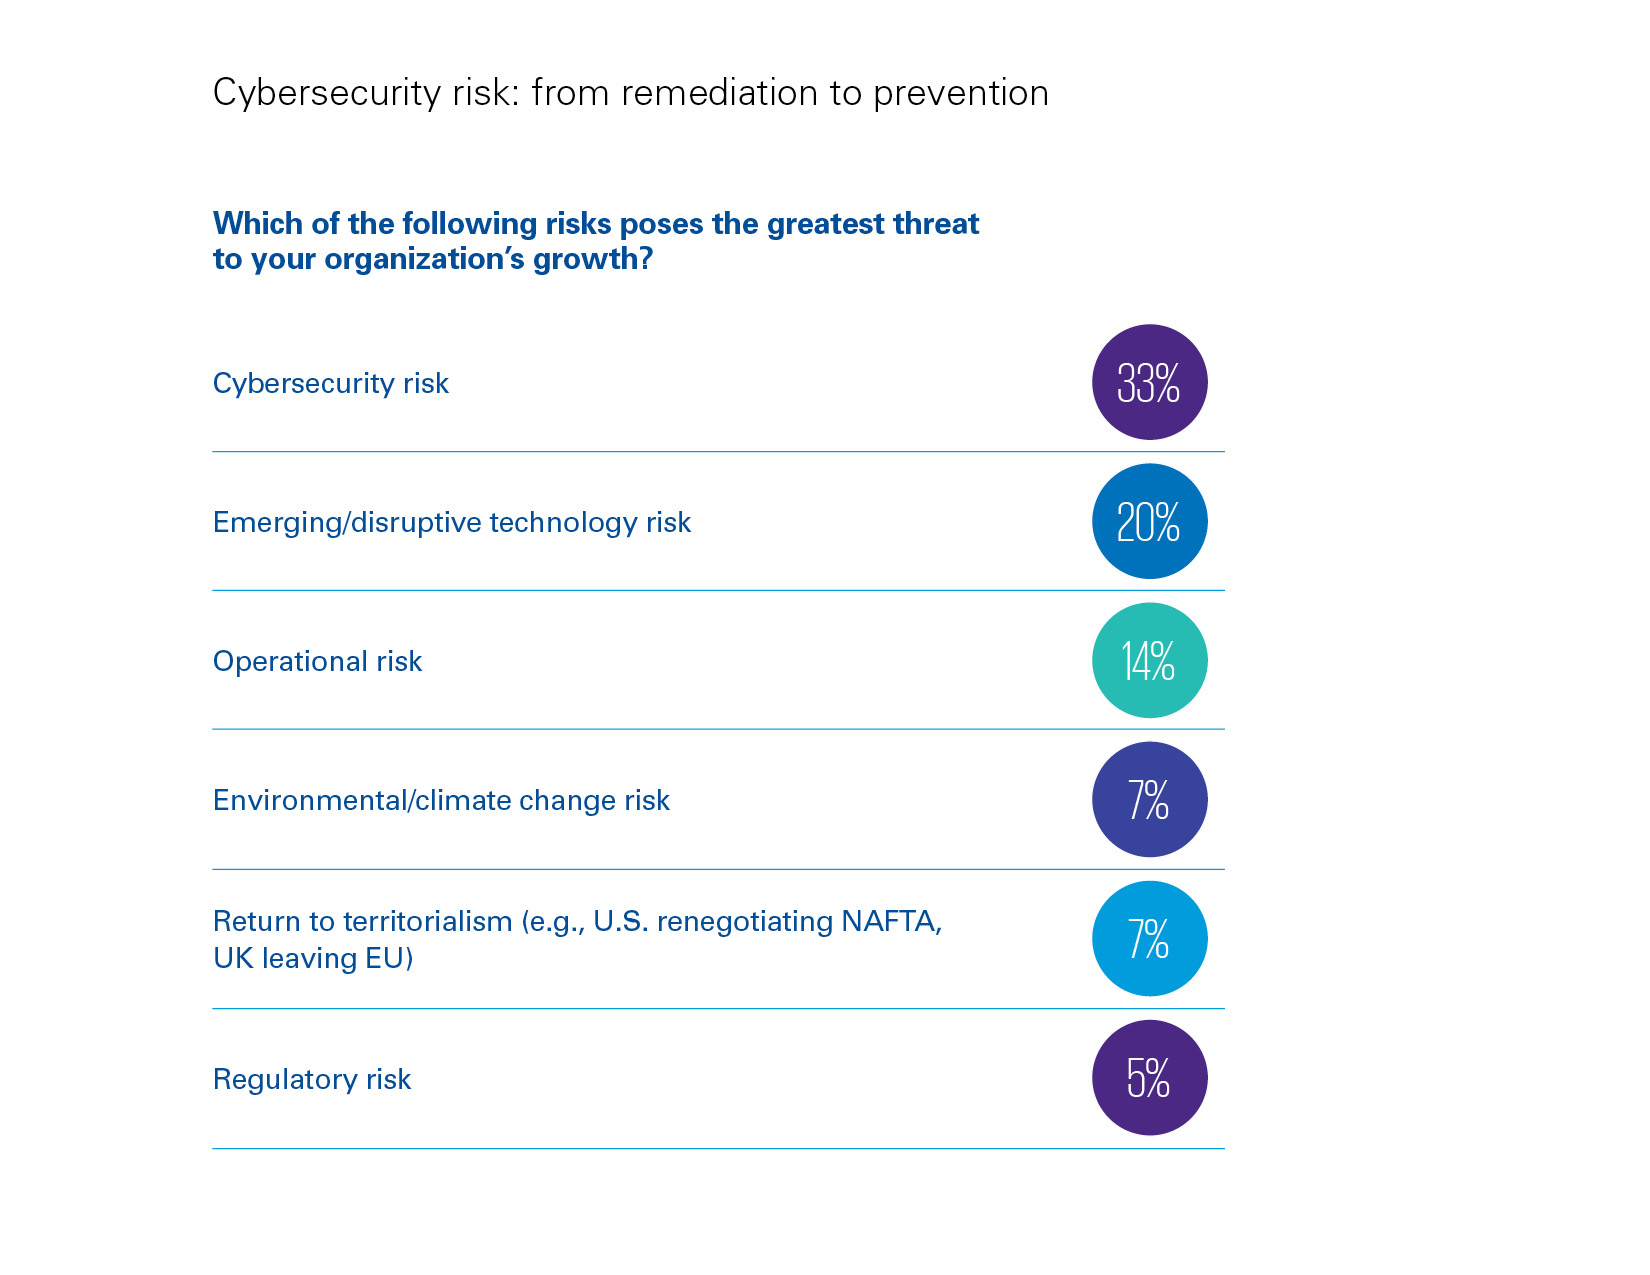 Cybersecurity Risk - a growing threat